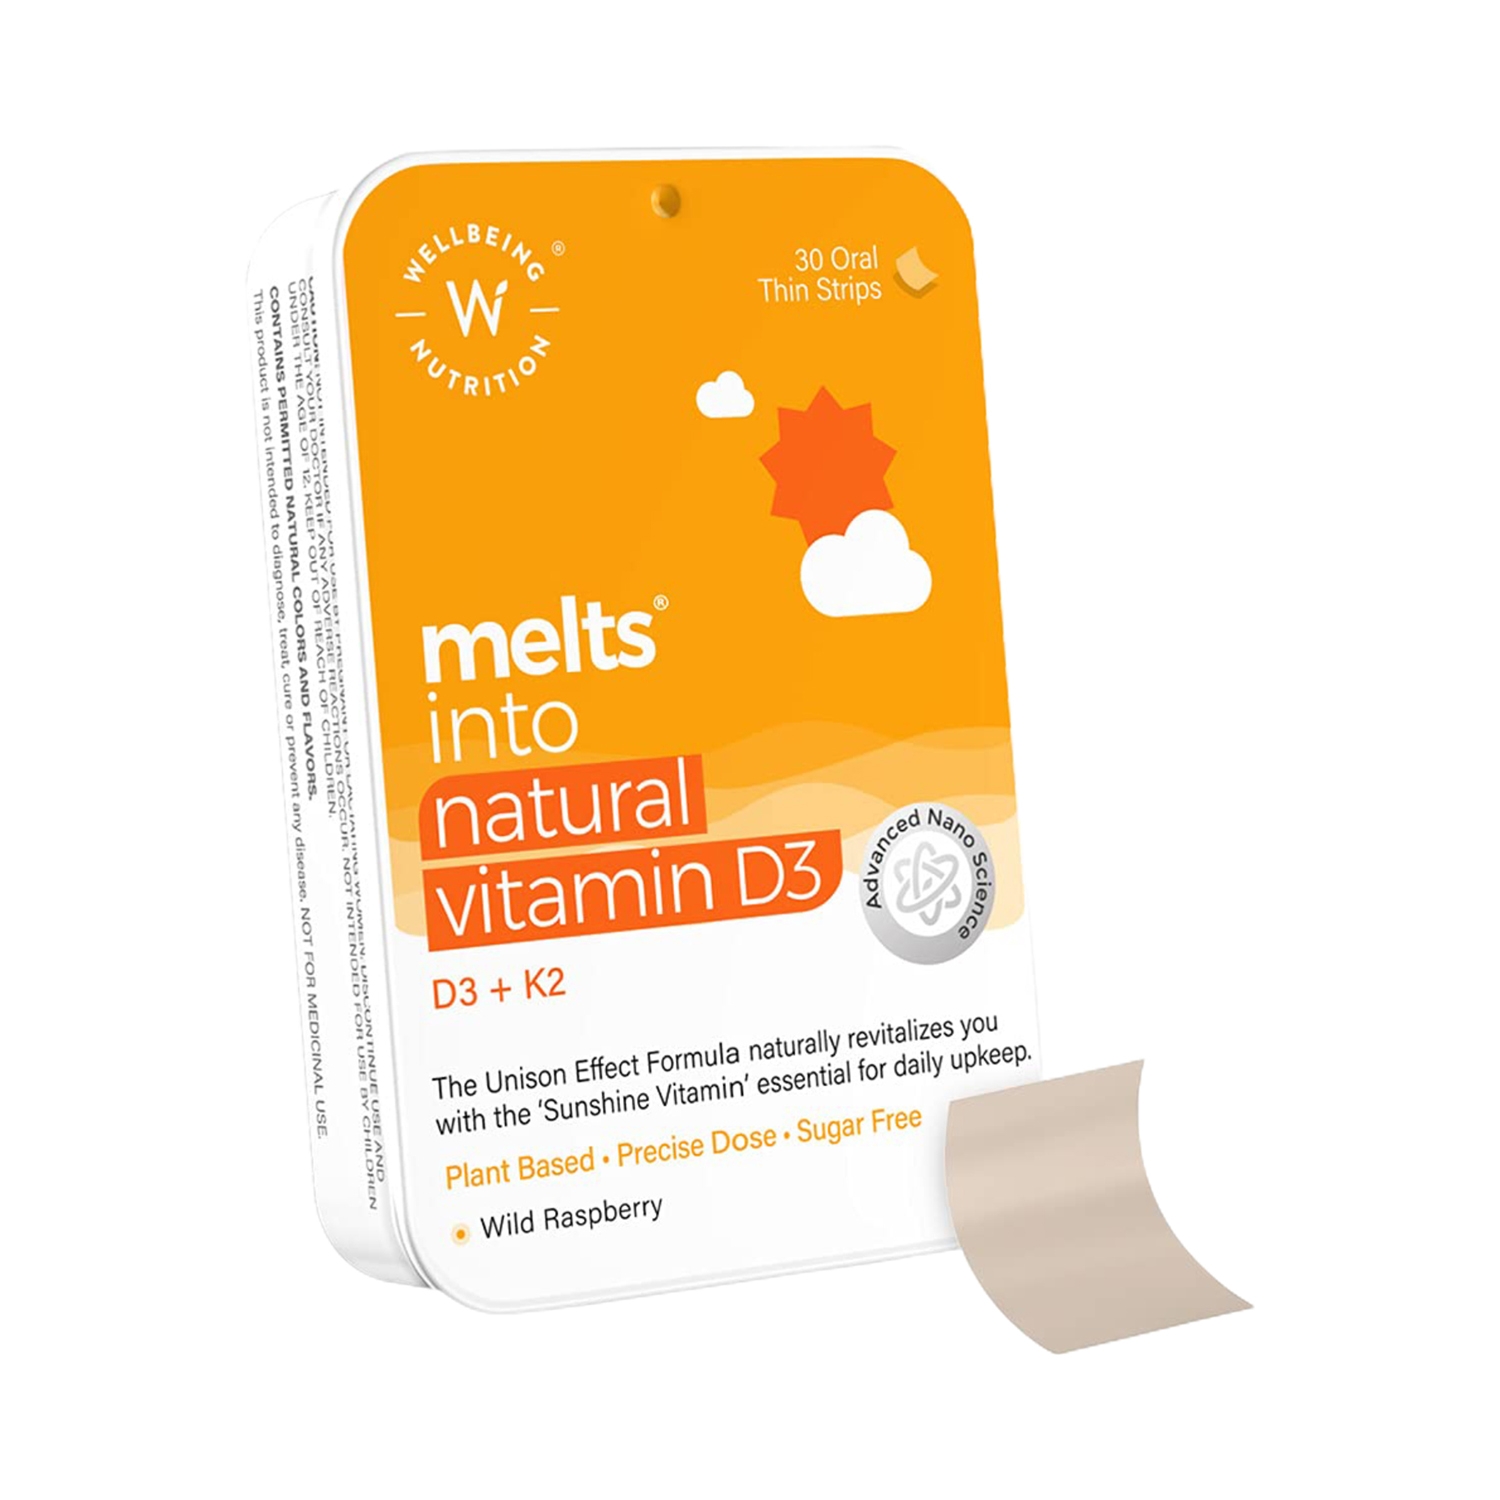 Wellbeing Nutrition | Wellbeing Nutrition Melts Natural Vitamin D3 + K2 with Vitashine & MenaquinGold with 100% RDA